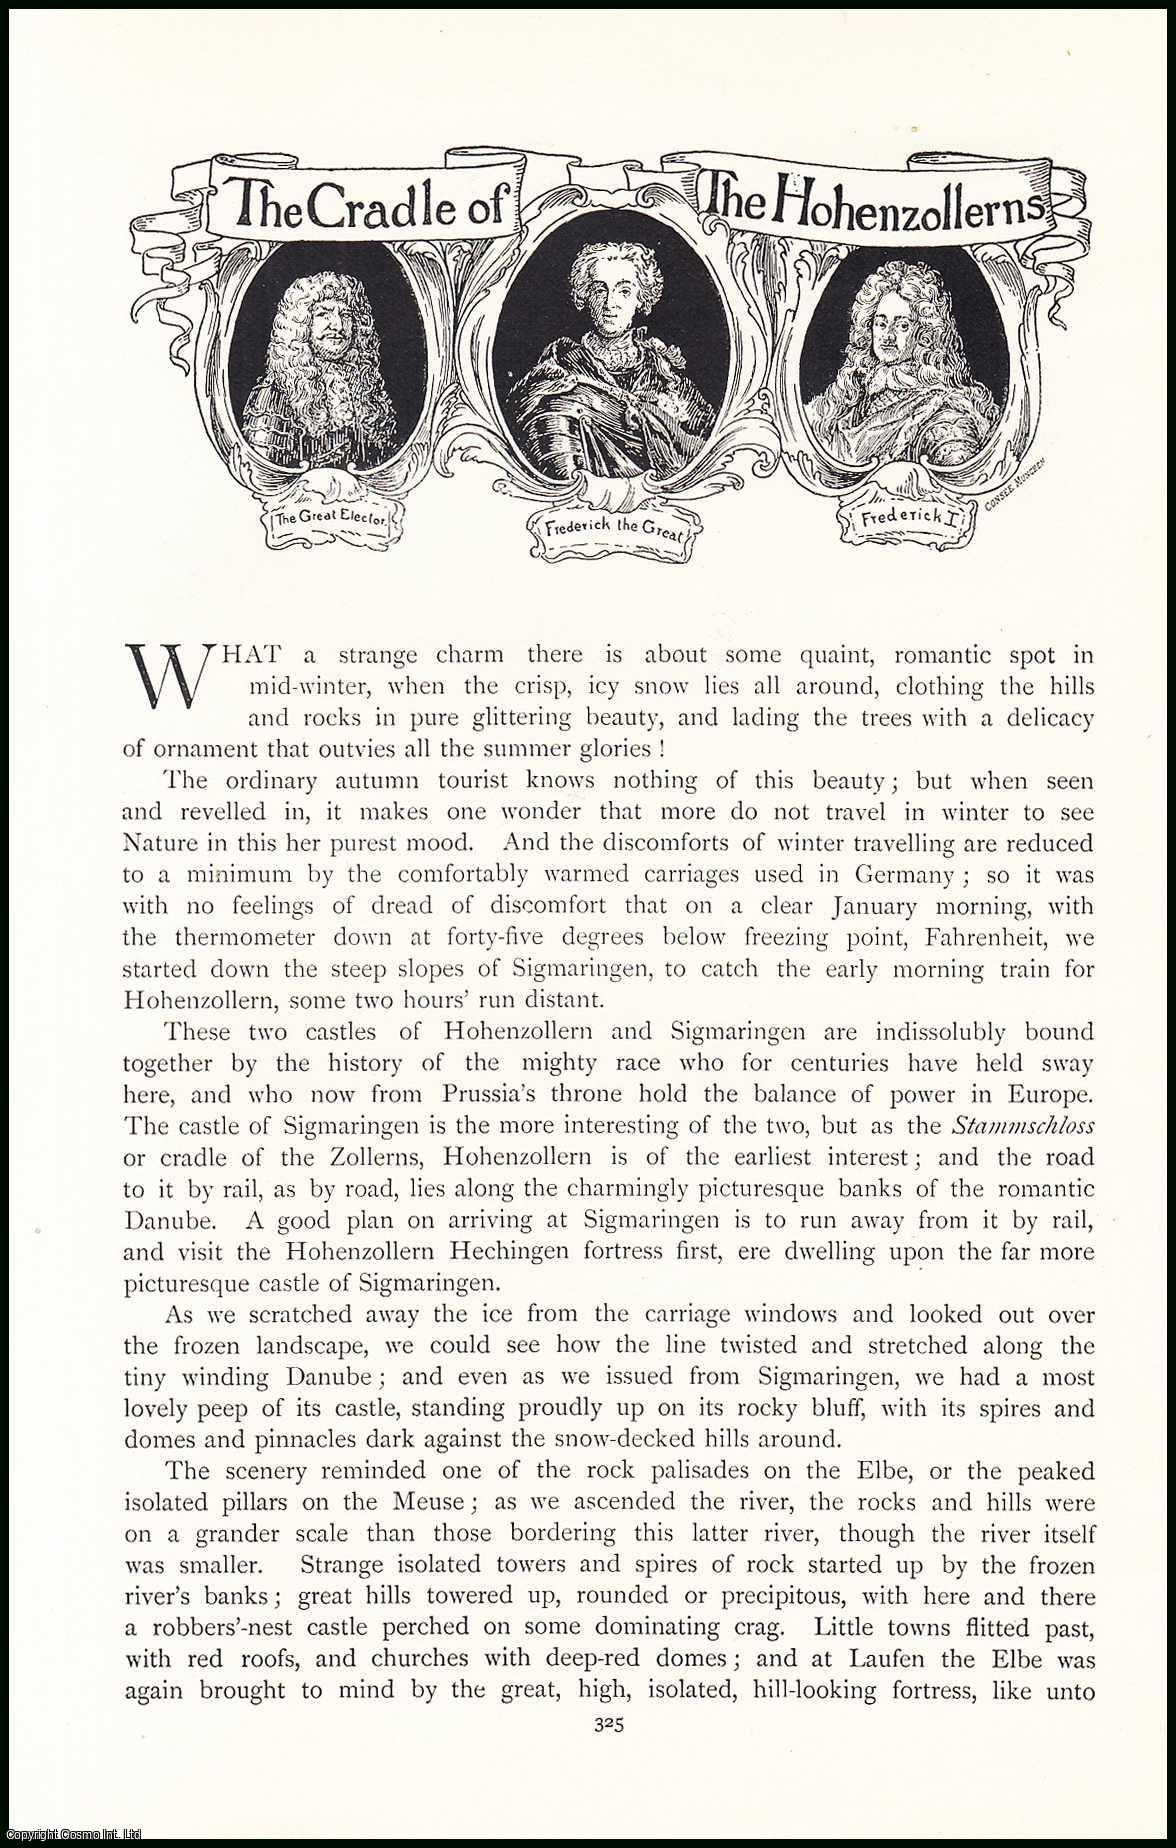 James Baker - The Cradle of the Hohenzollerns. An uncommon original article from the Pall Mall Magazine, 1895.